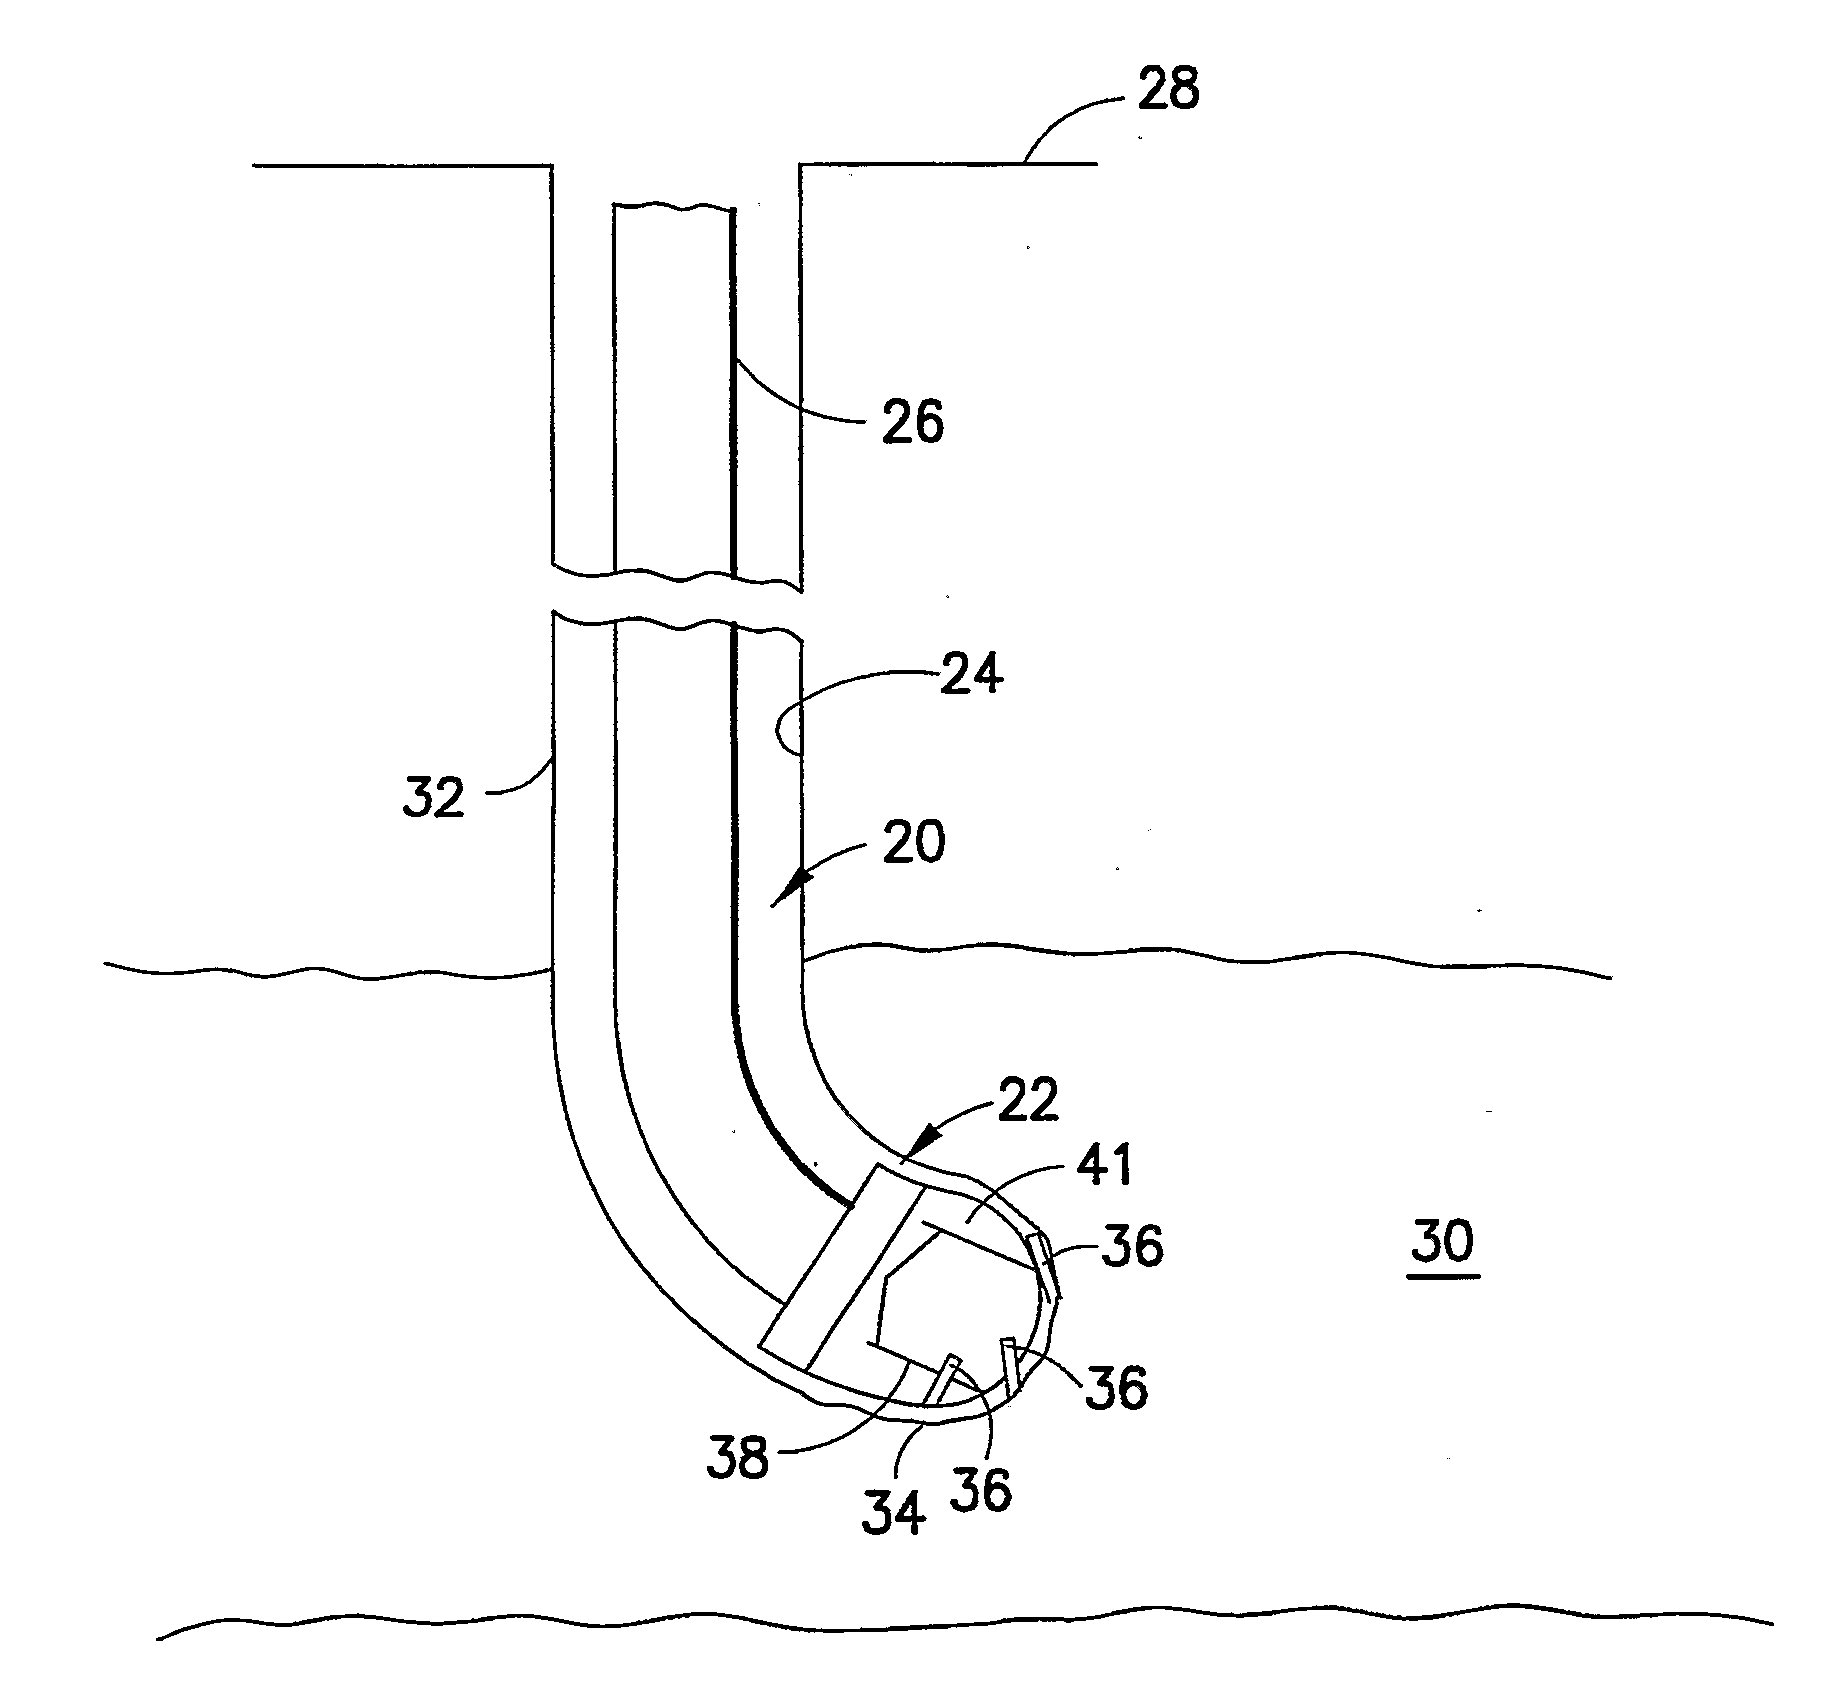 System and Method for Drilling a Borehole